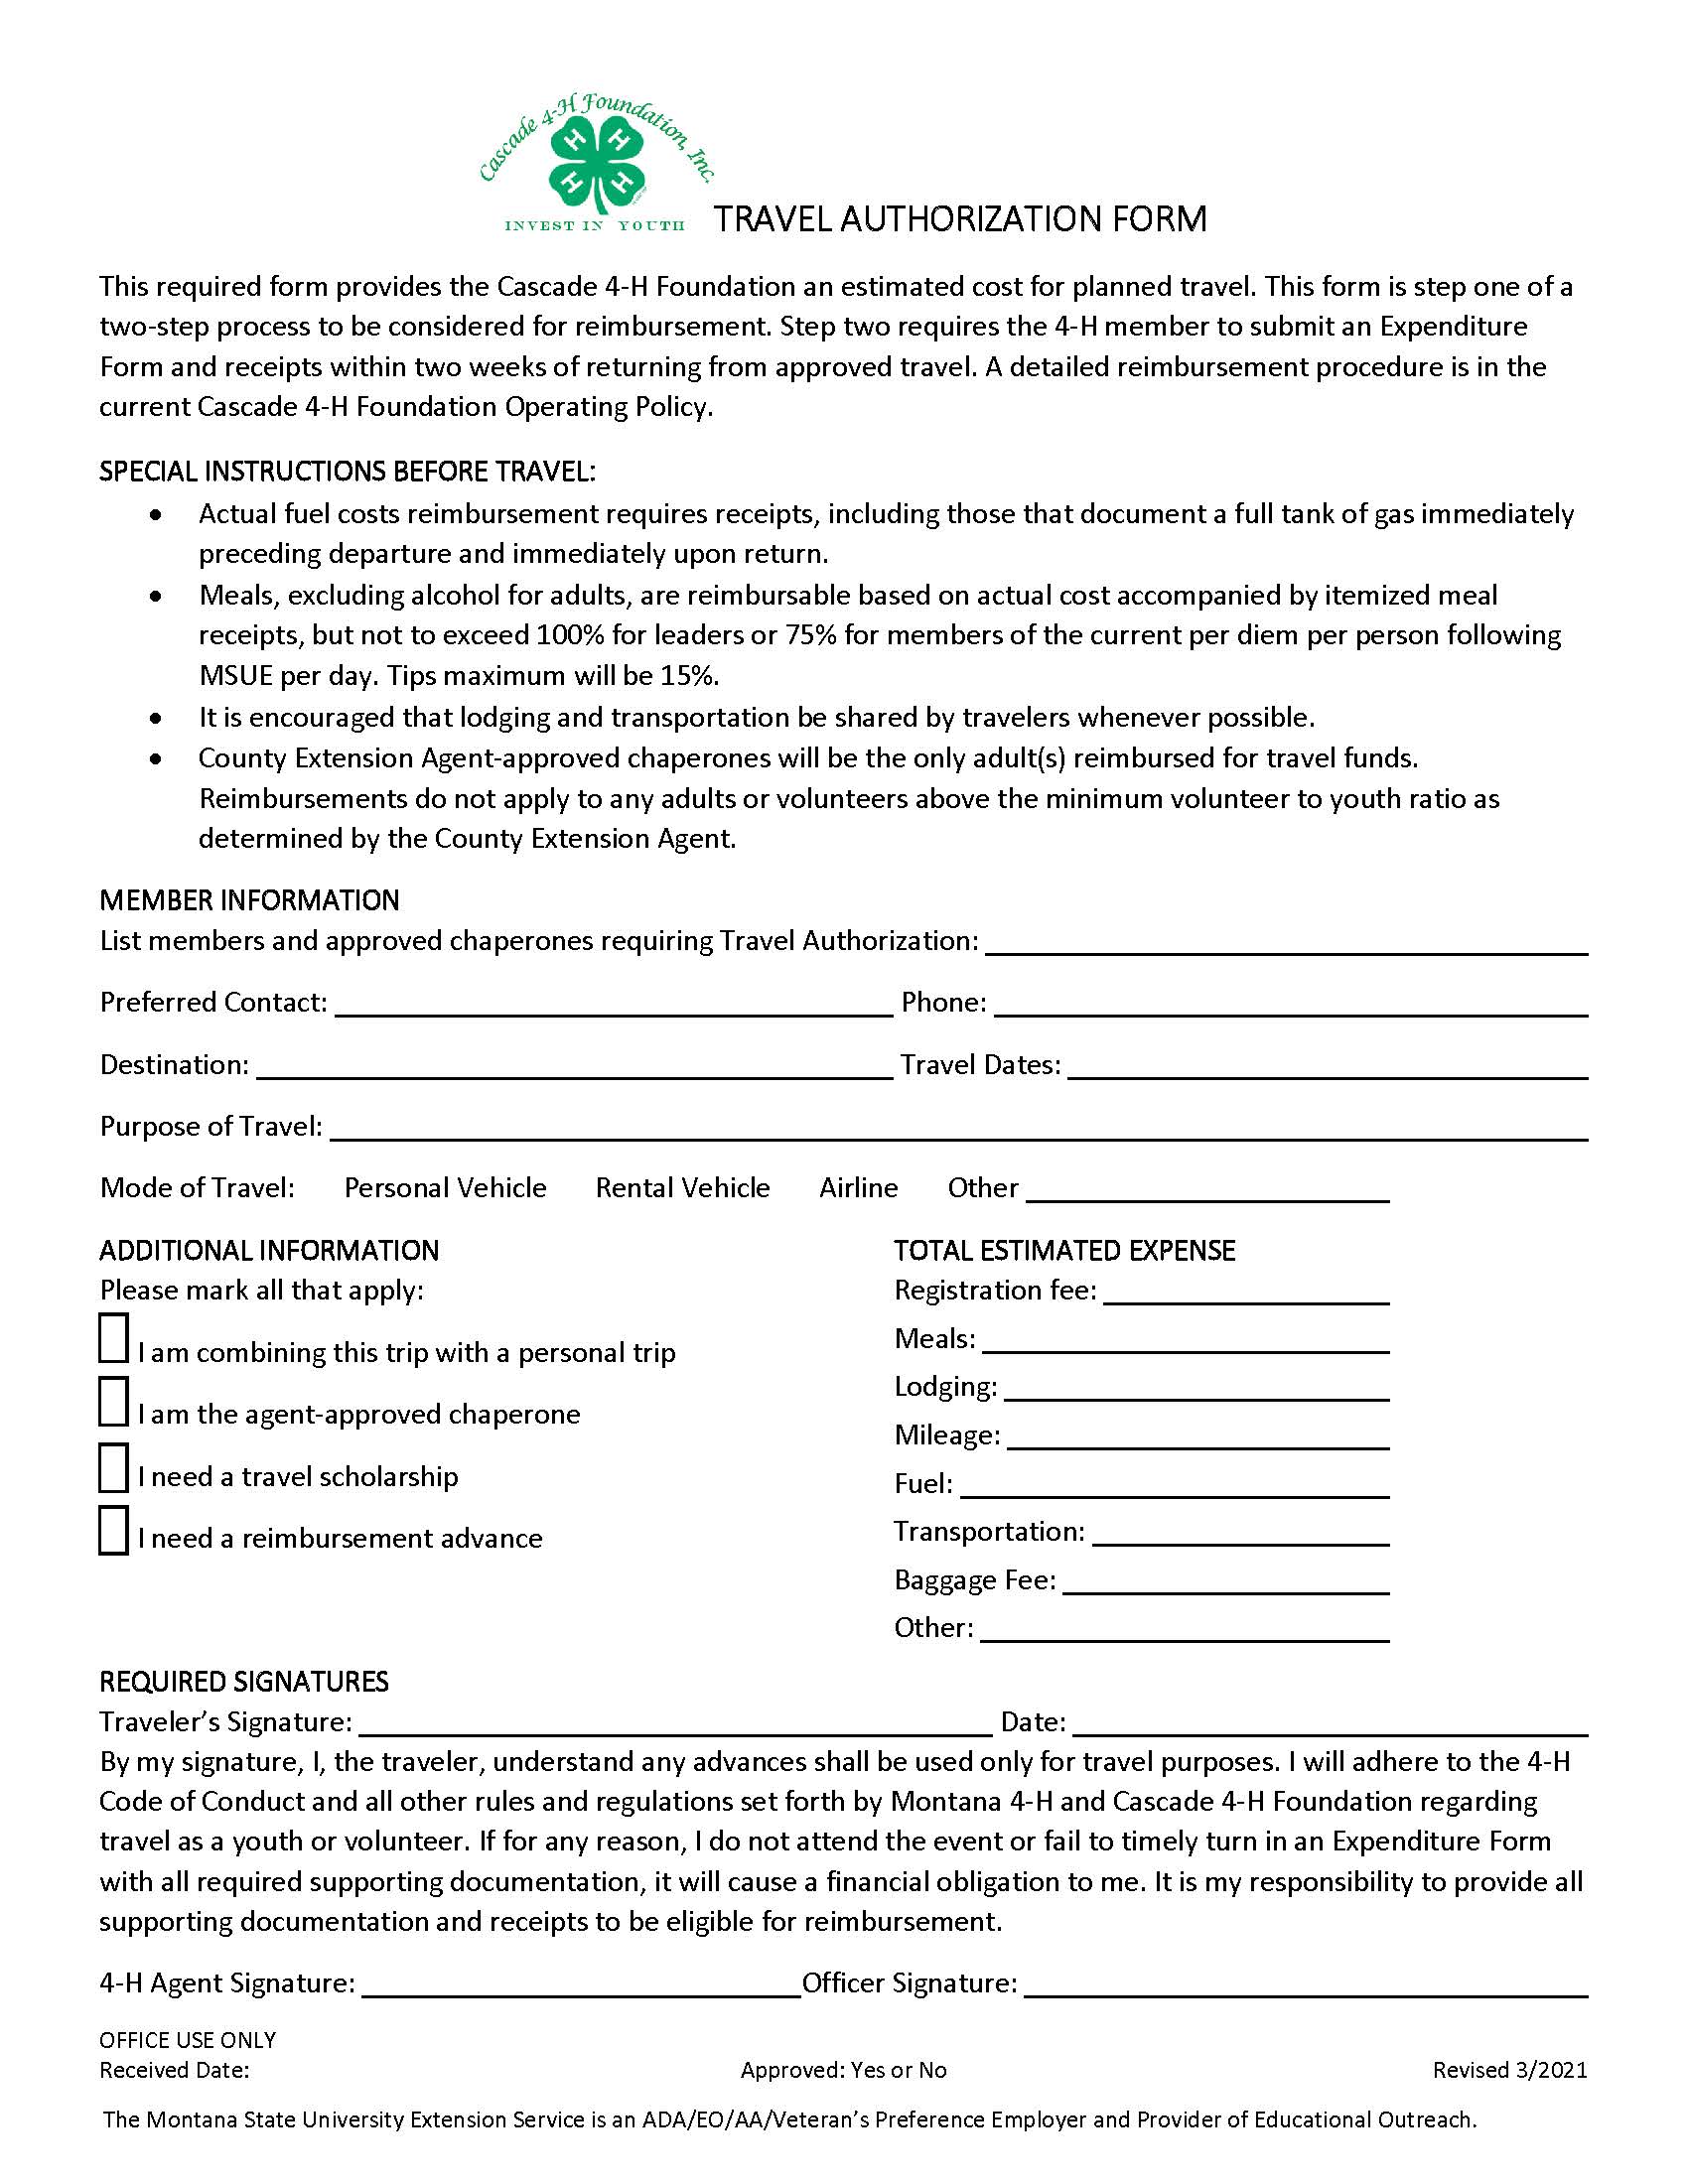 Picture of the downloadable Travel Authorizaiton form.